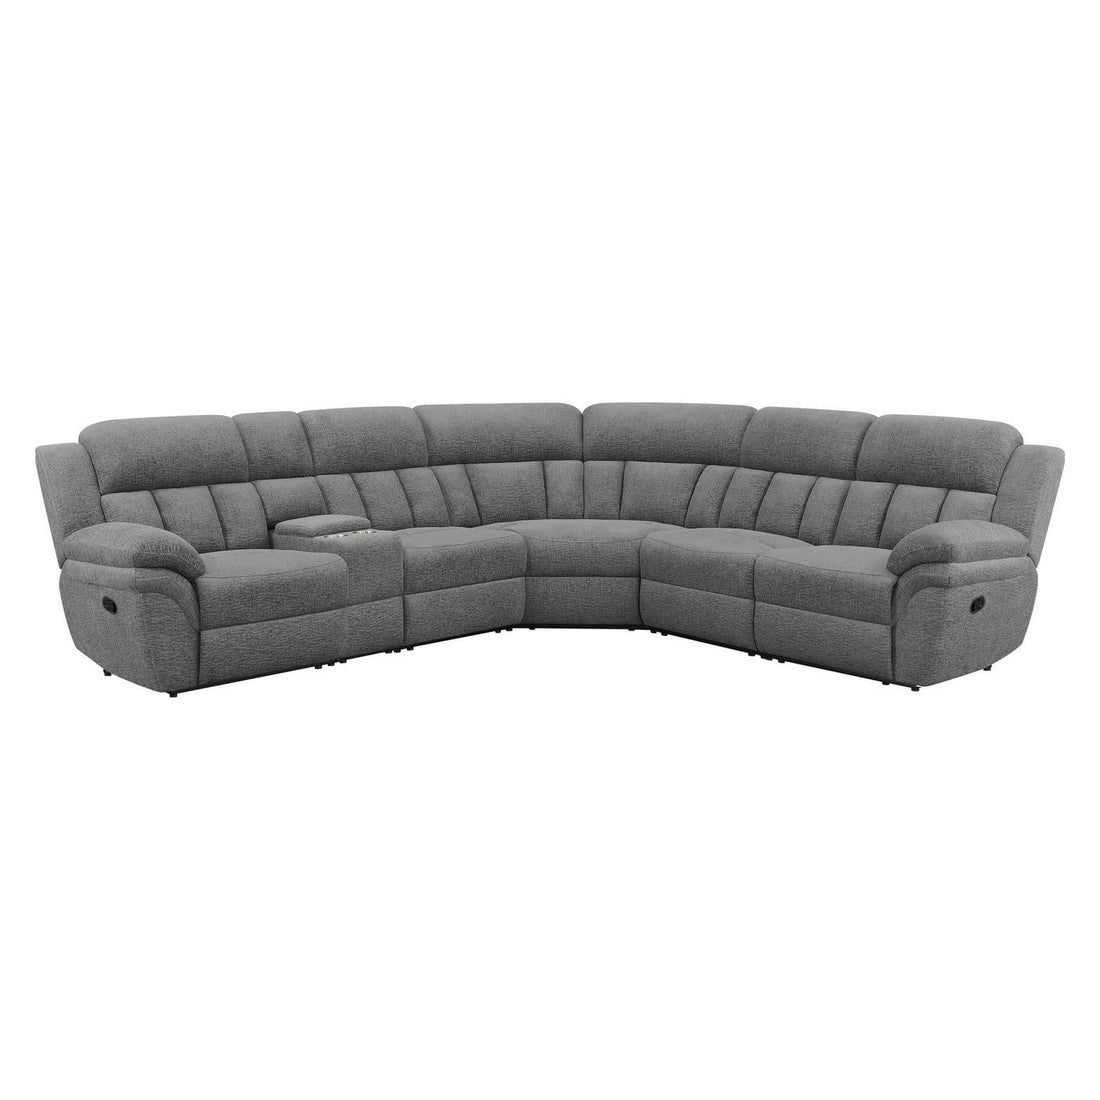 Bahrain 6-piece Upholstered Motion Sectional Charcoal 609540